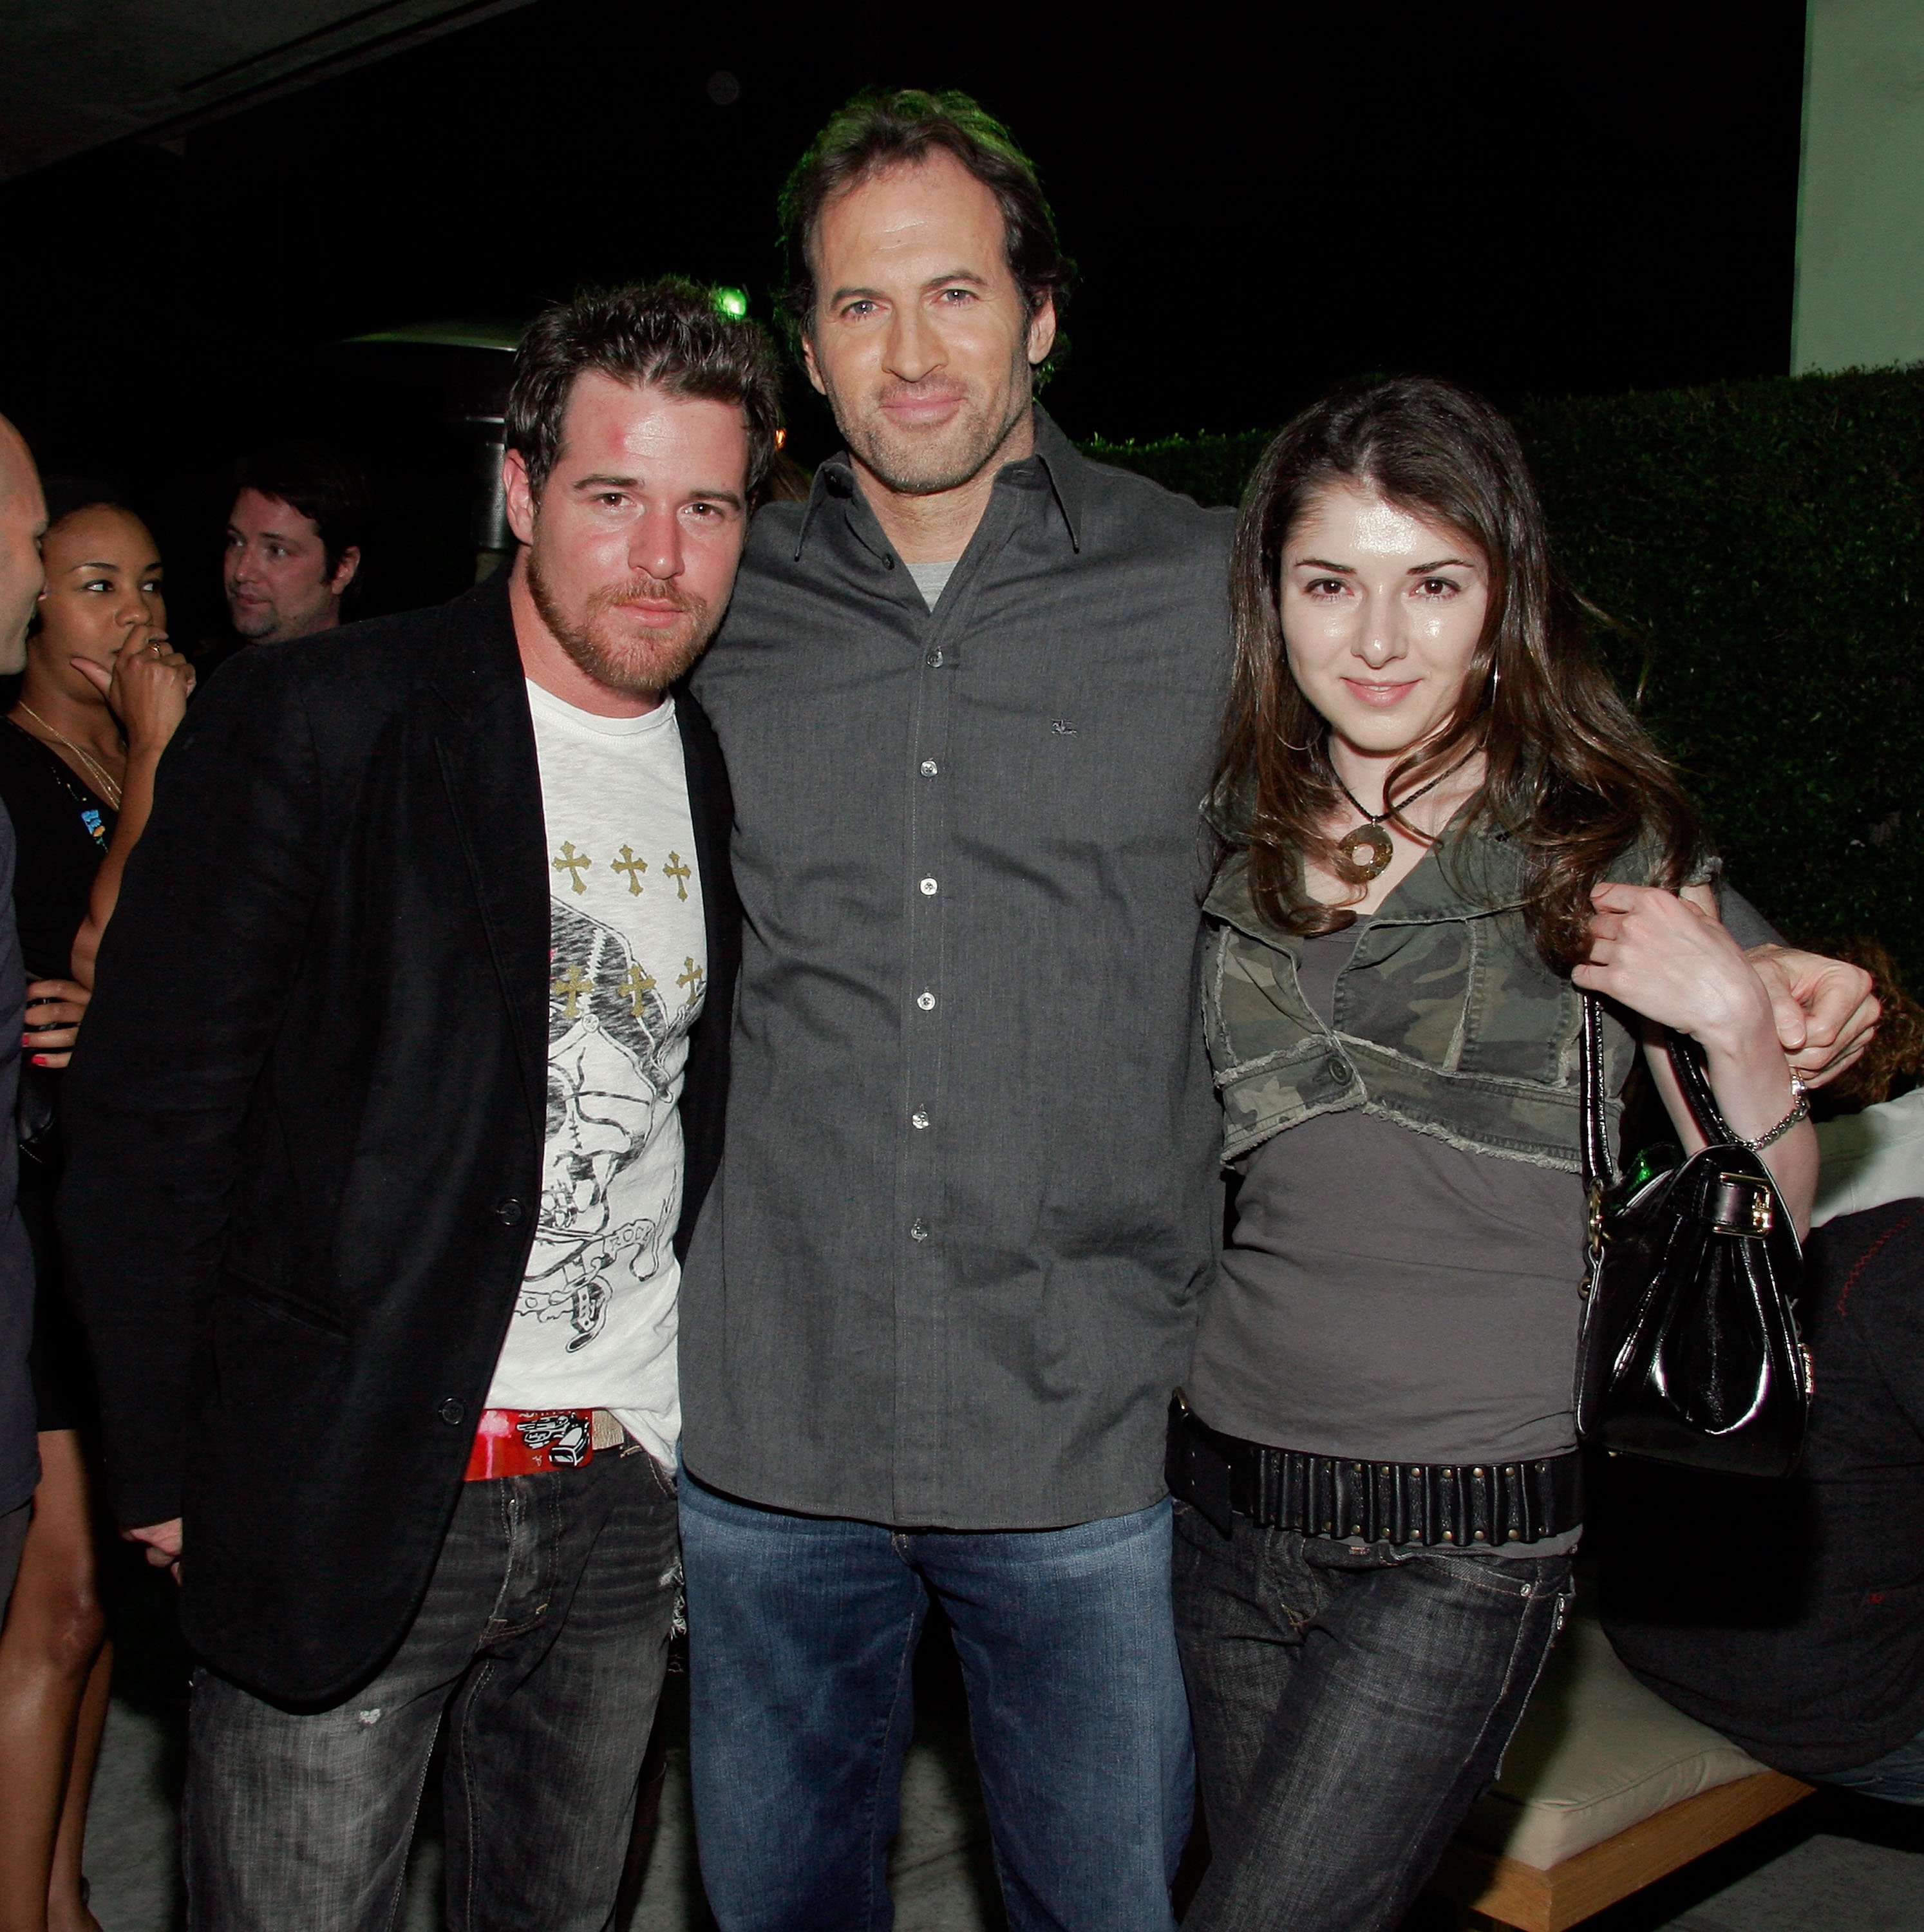 Actors Derek Phillips, Scott Patterson, and Kristine Saryan at the Sundance Channel's launch of Robert Redford's "The Green" at the former La Brea Chrysler Jeep showroom on April 9, 2007, in Los Angeles, California. | Source: Getty Images